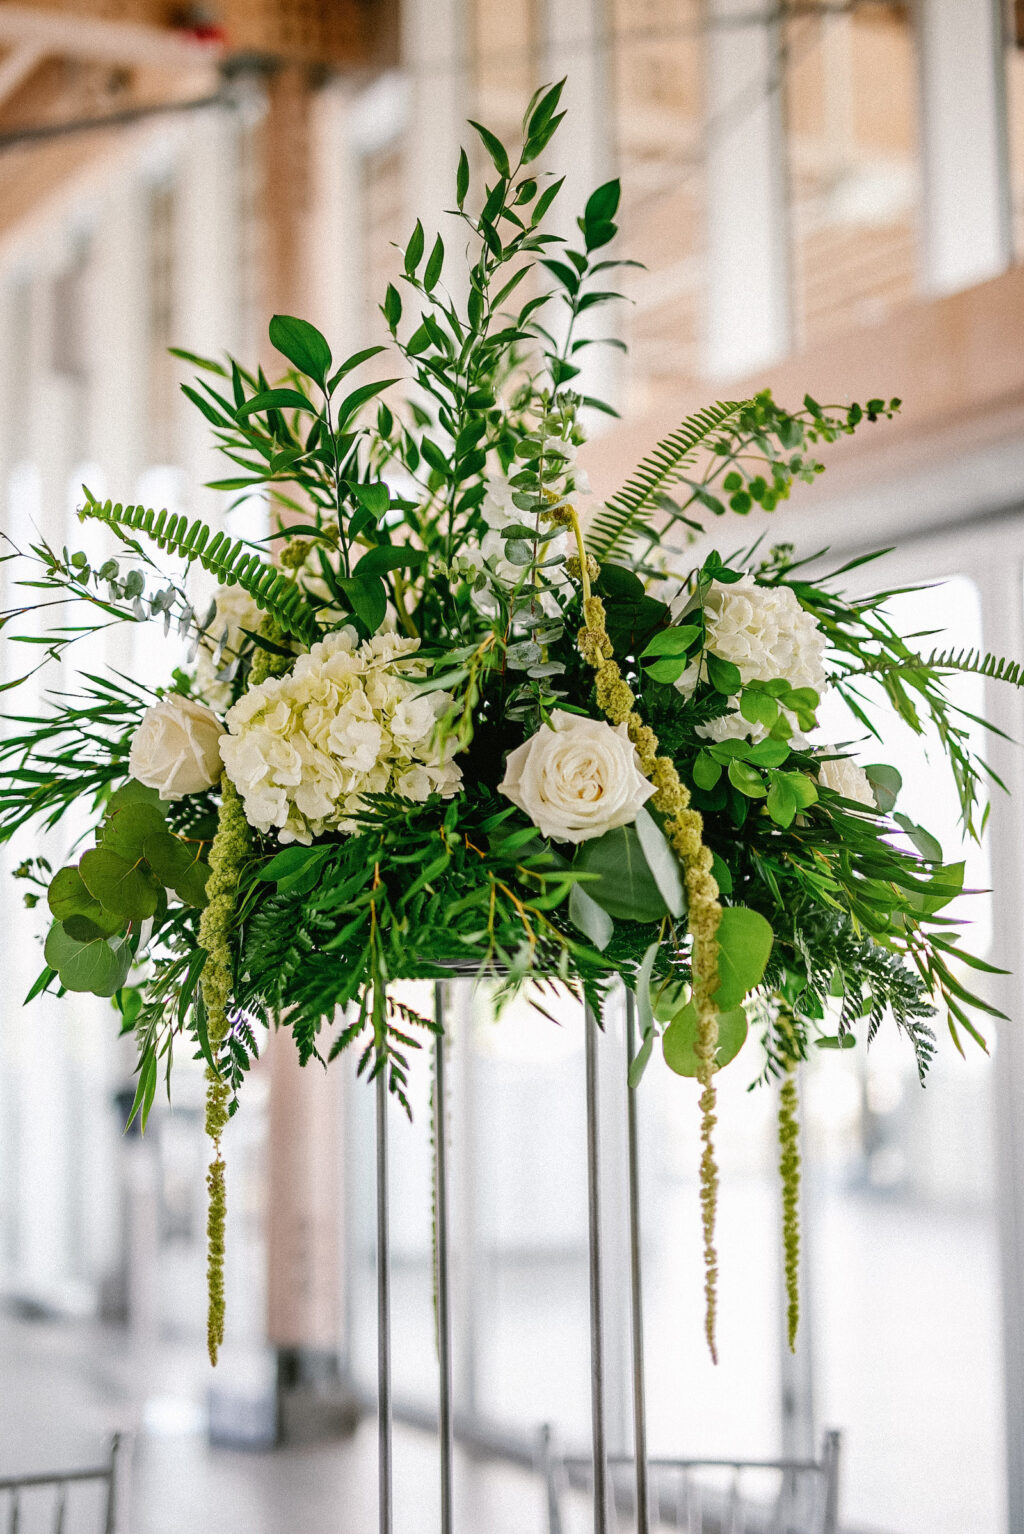 Modern Elegant Wedding Reception Decor, Tall Silver Stand with Greenery, White Roses and Hydragneas, Hanging Amaranthus Floral Centerpiece